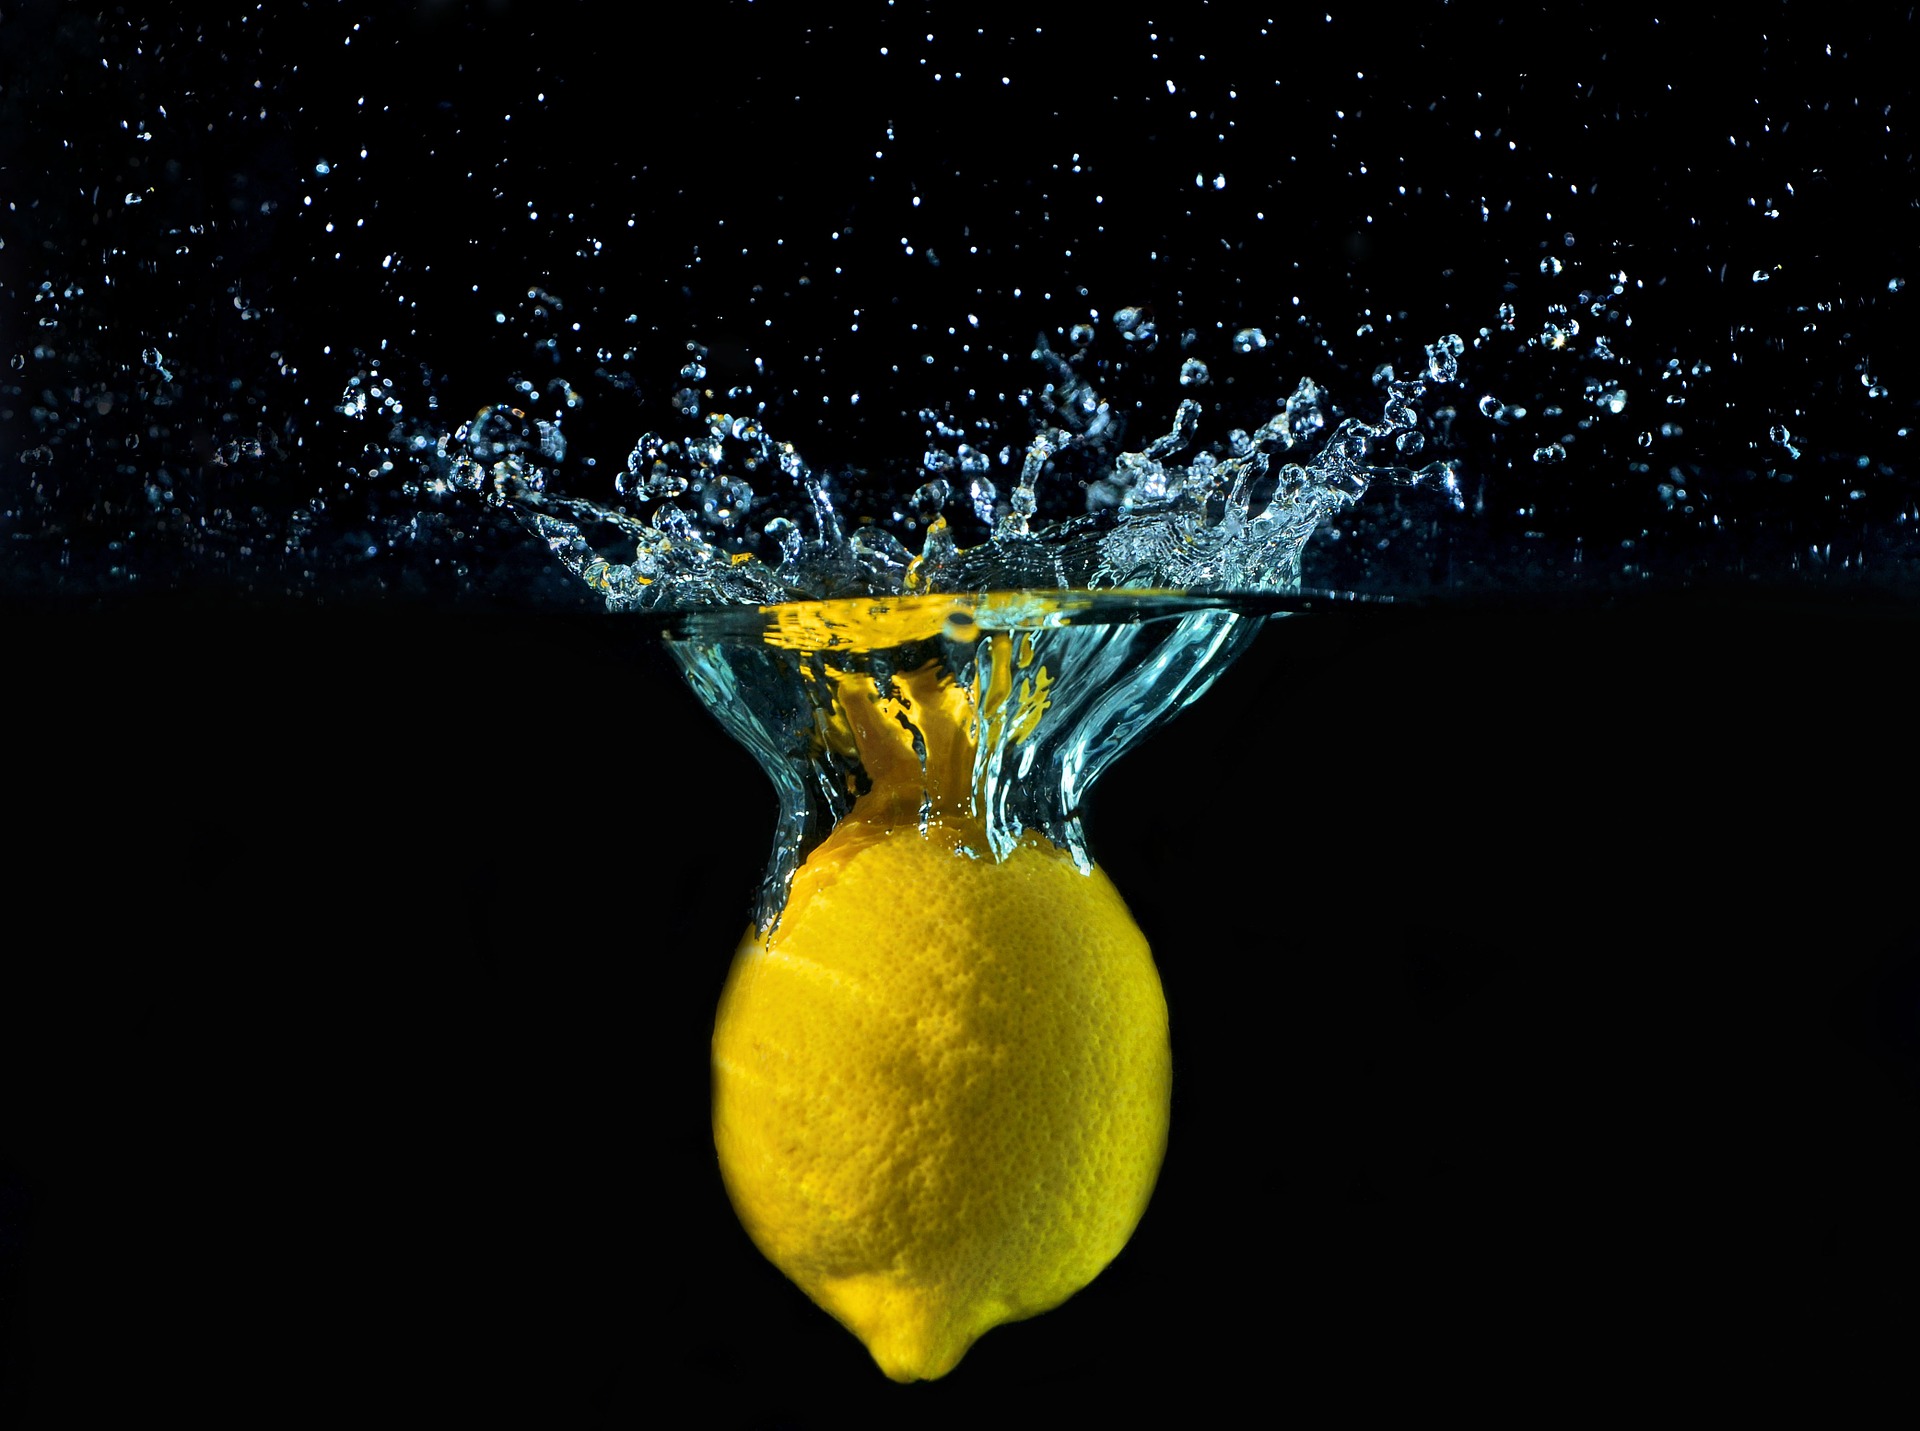 A bright yellow lemon lands in water; the background is black